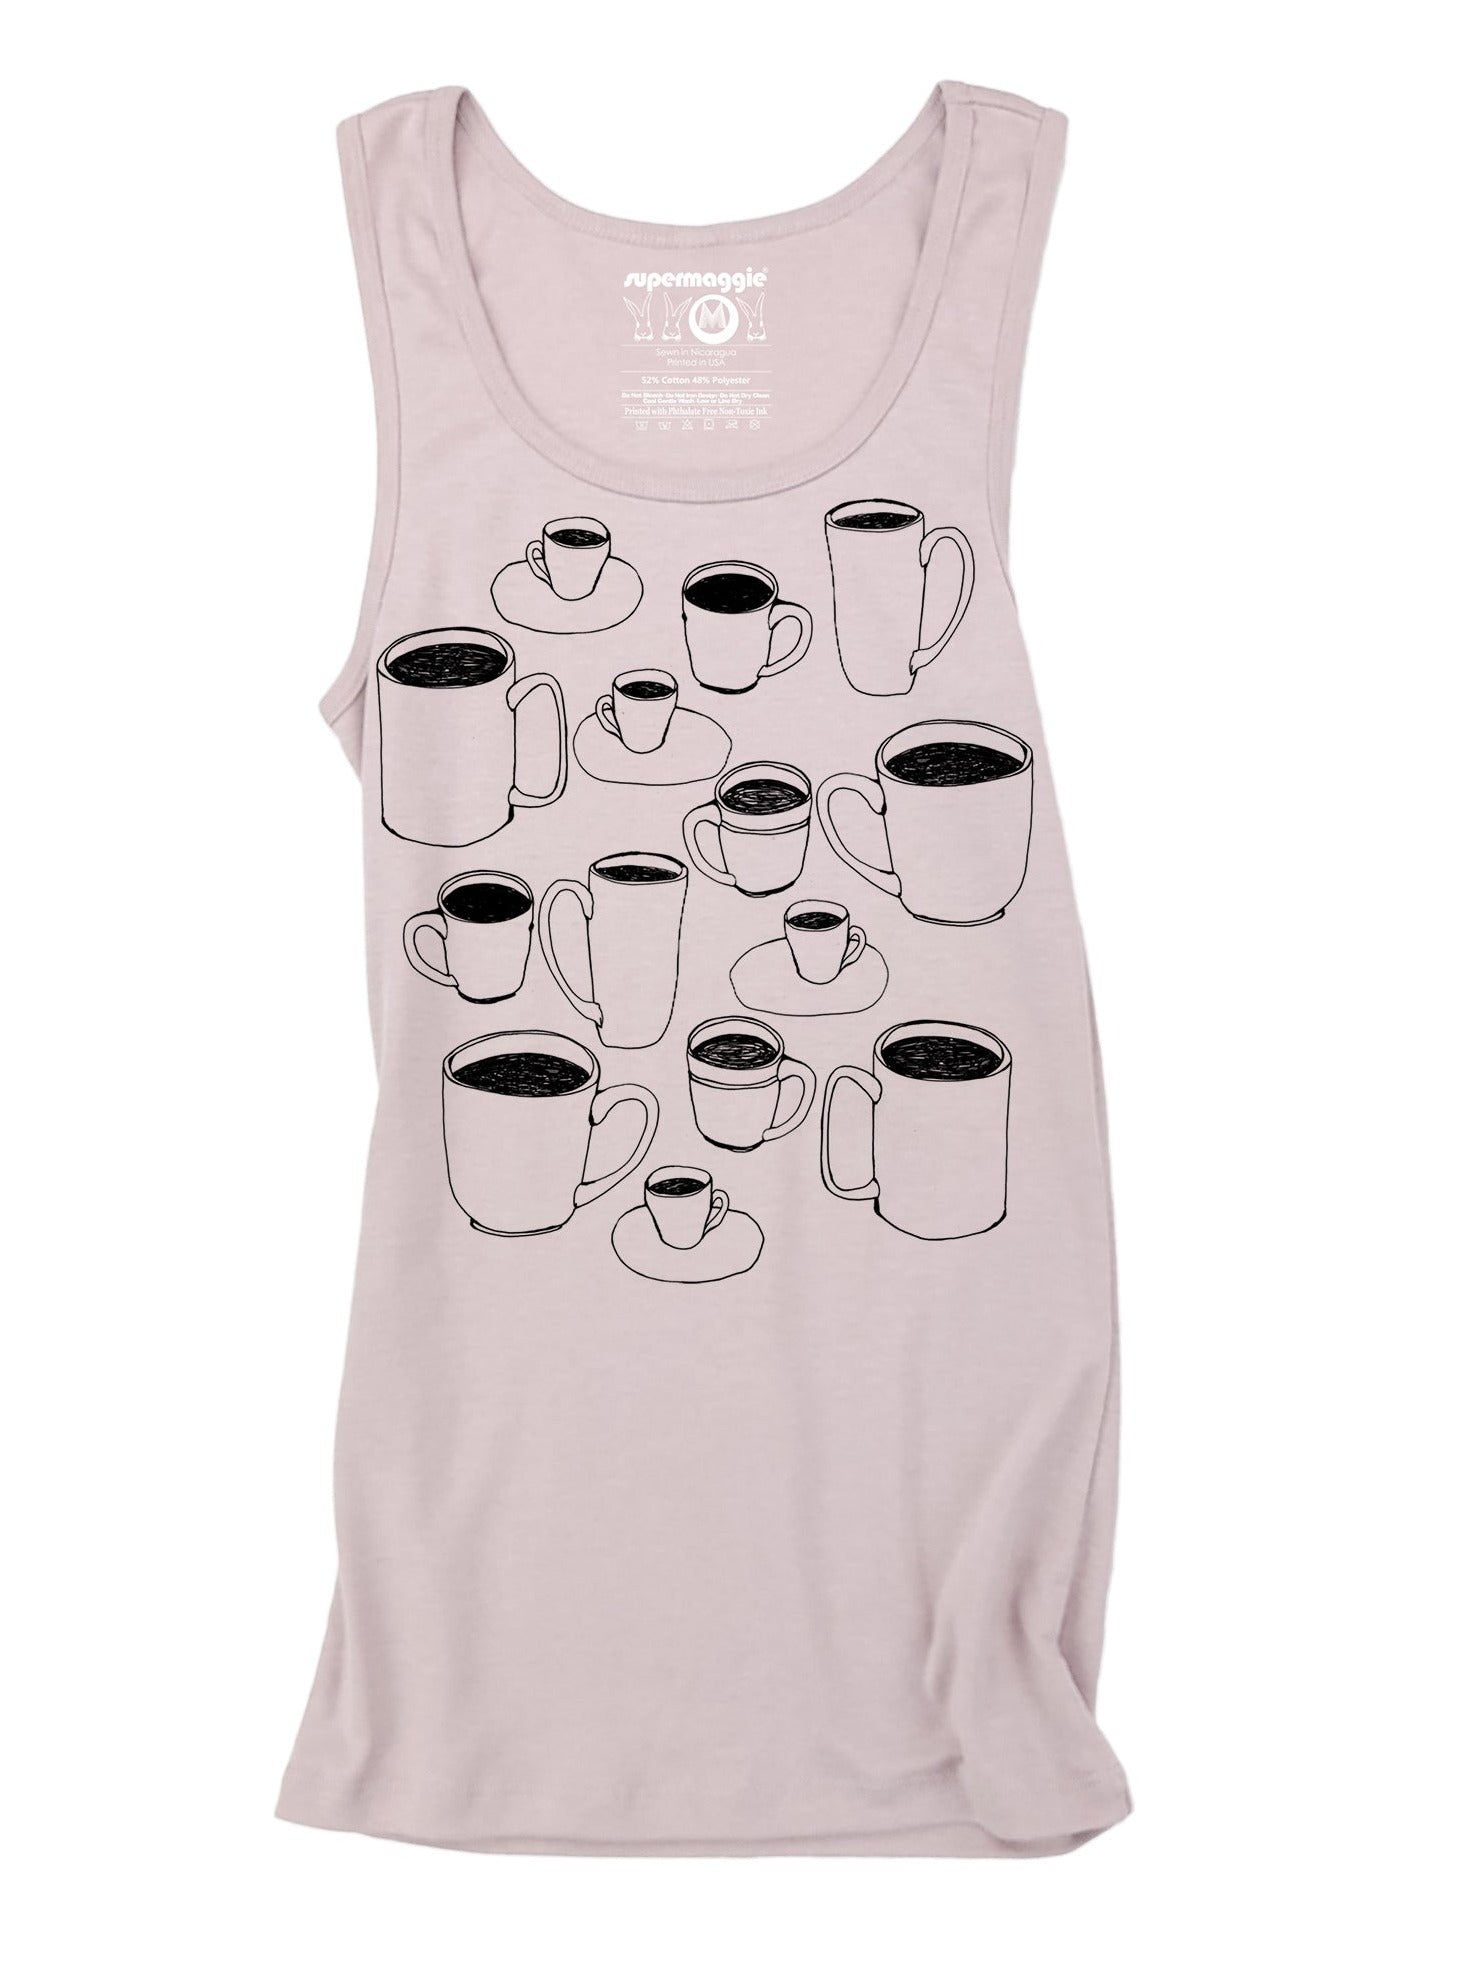 Long and lean tank top in heather pink. It has illustrated coffee mugs of all shapes and sizes screenprinted on the front in black ink.